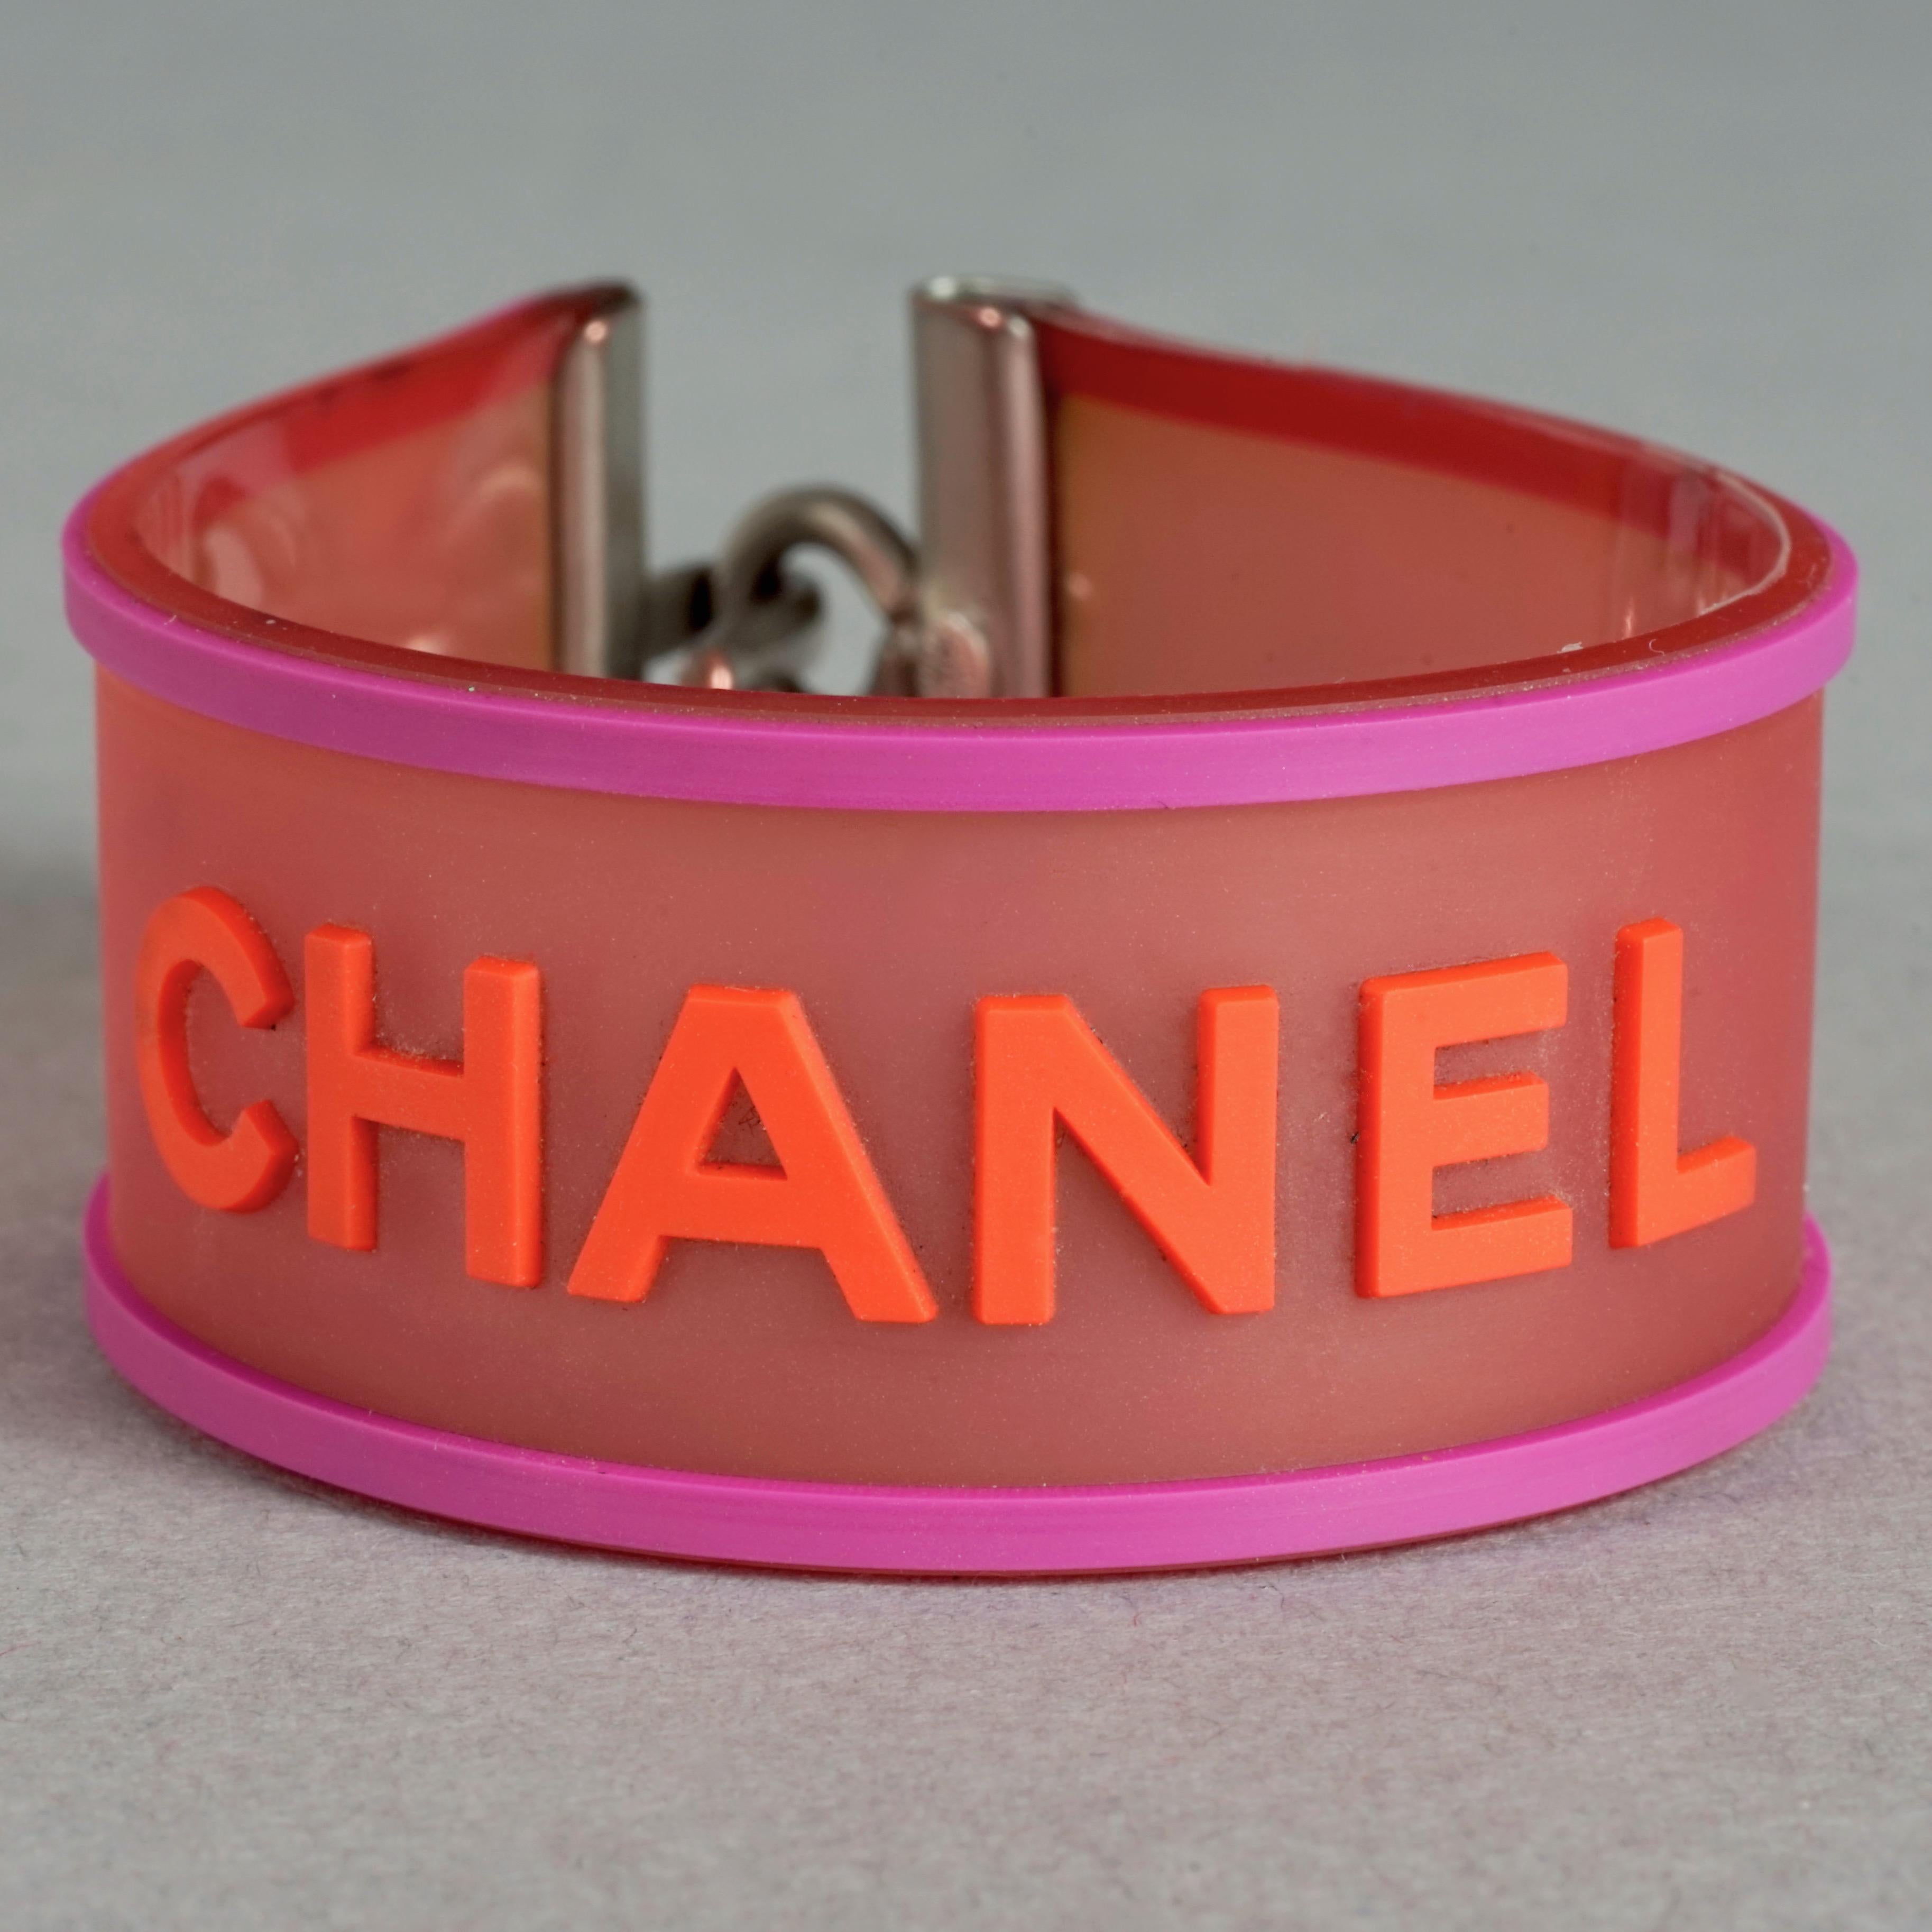 Vintage 2001 CHANEL Logo Camellia Pink Orange Rubber Cuff Bracelet

Measurements:
Height: 0.90 inch (2.3 cm)
Circumference: 6.50 inches (16.5 cm)

Features:
- 100% Authentic CHANEL.
- Translucent pink rubber with embossed CHANEL and camellia